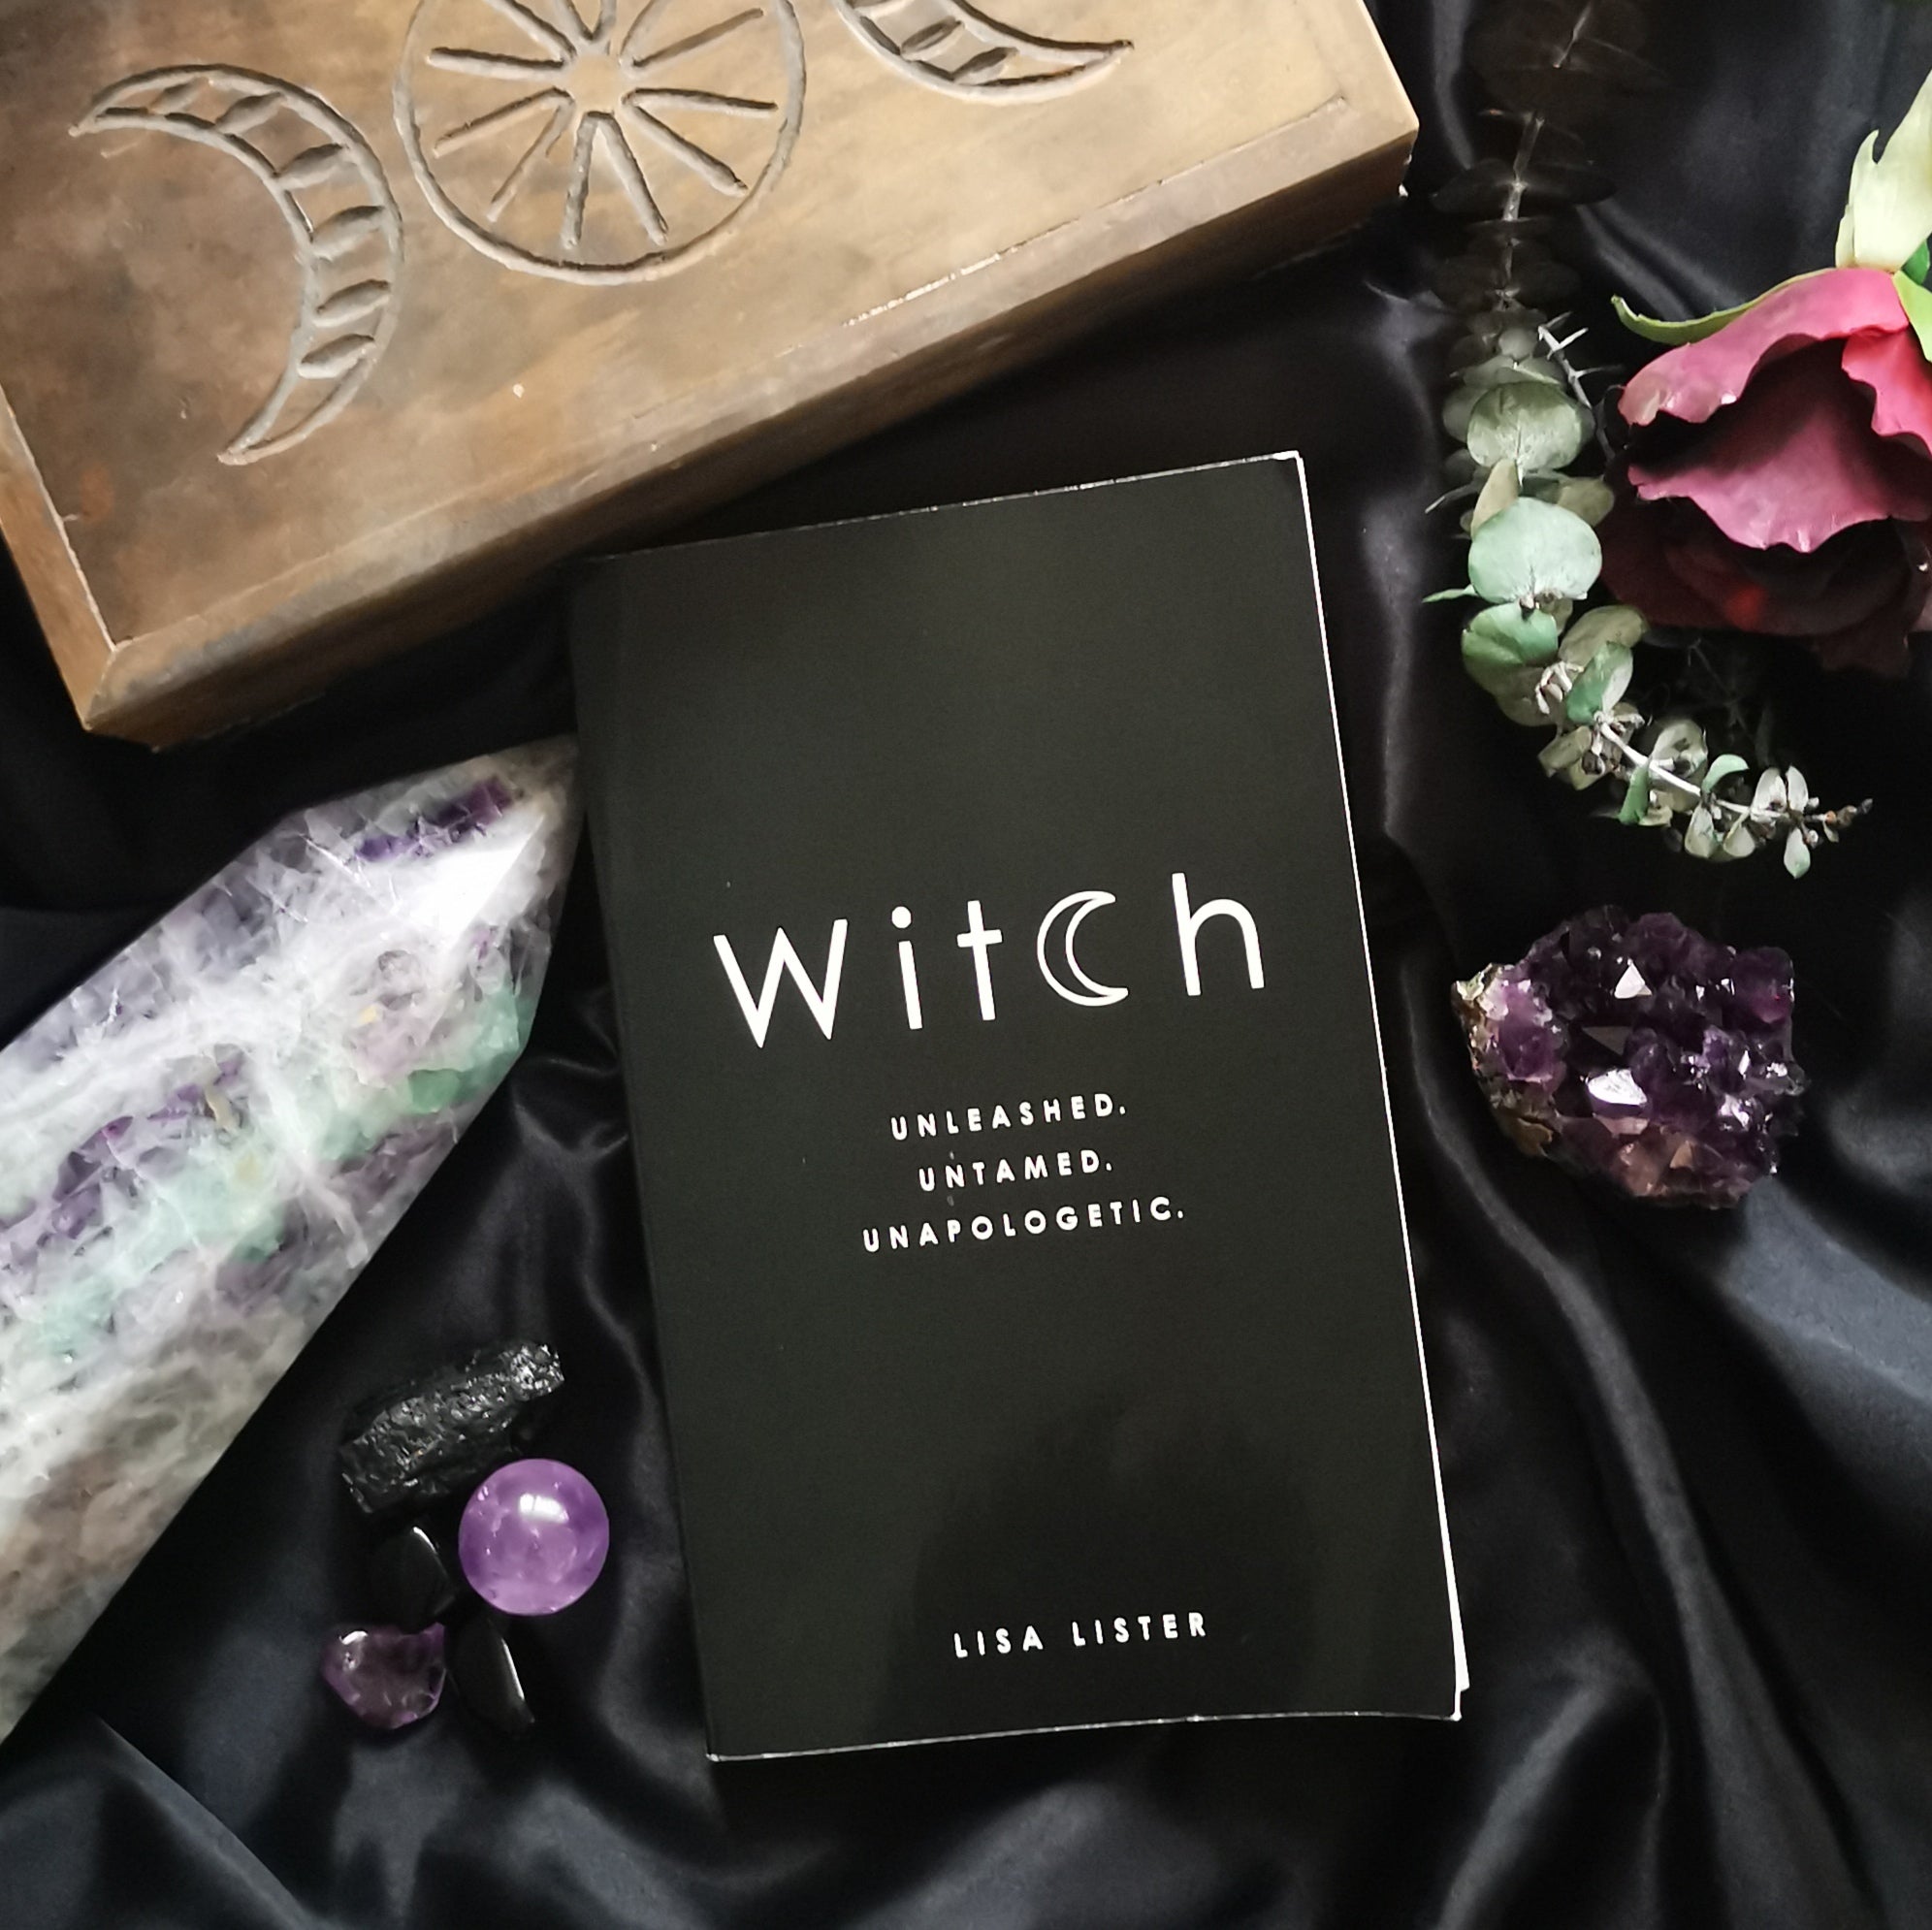 Witch. Unleashed. Untamed. Unapologetic - Lisa Lister